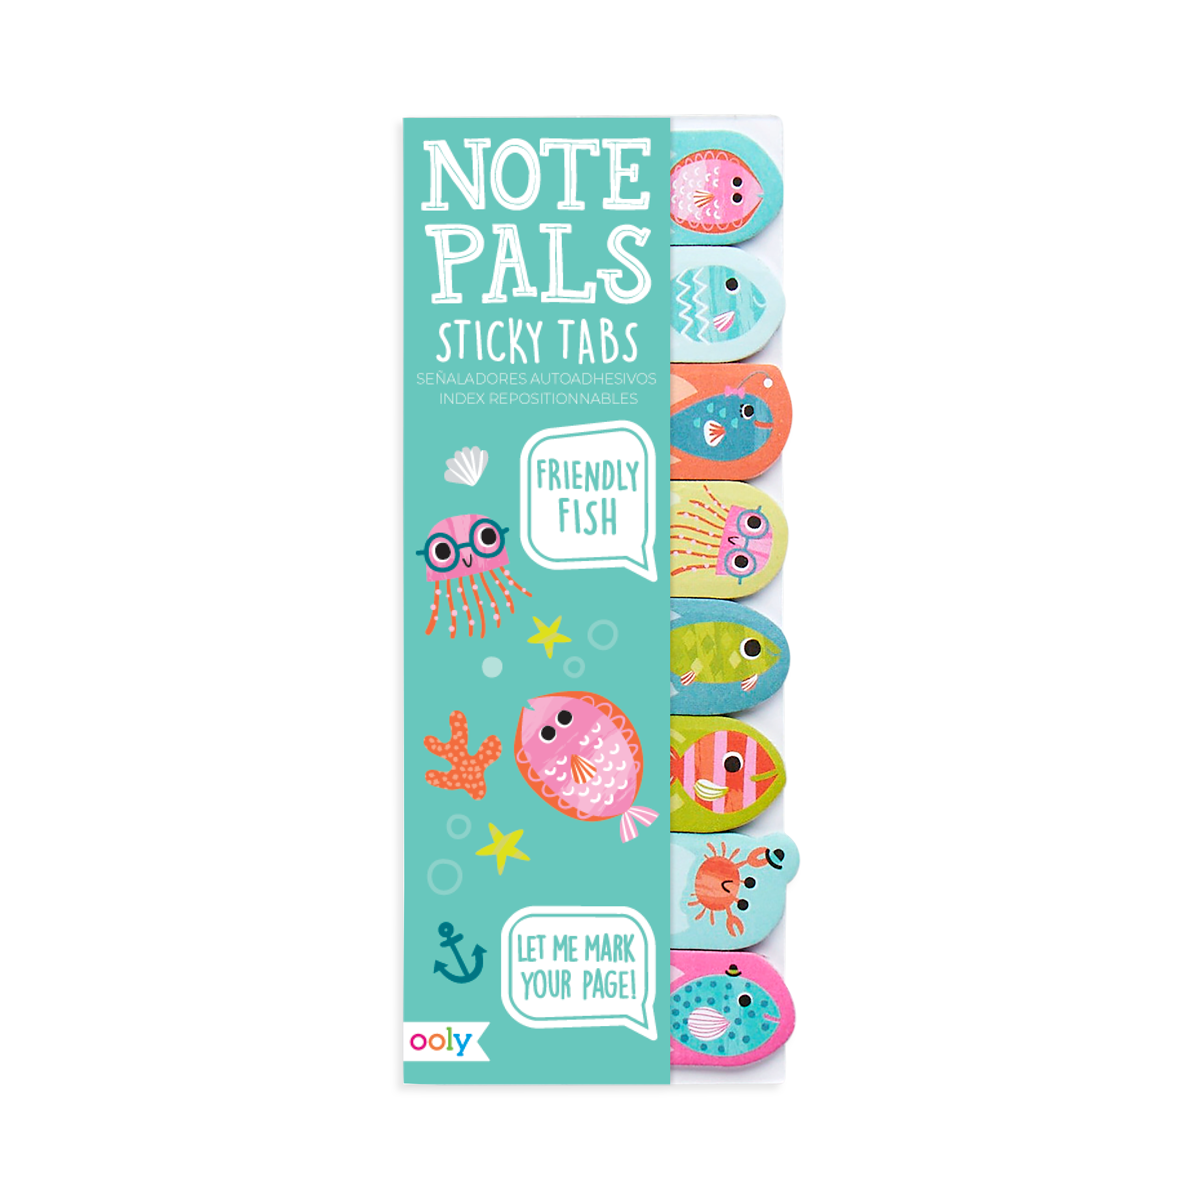 OOLY Note Pals Sticky Tabs - Friendly Fish in packaging